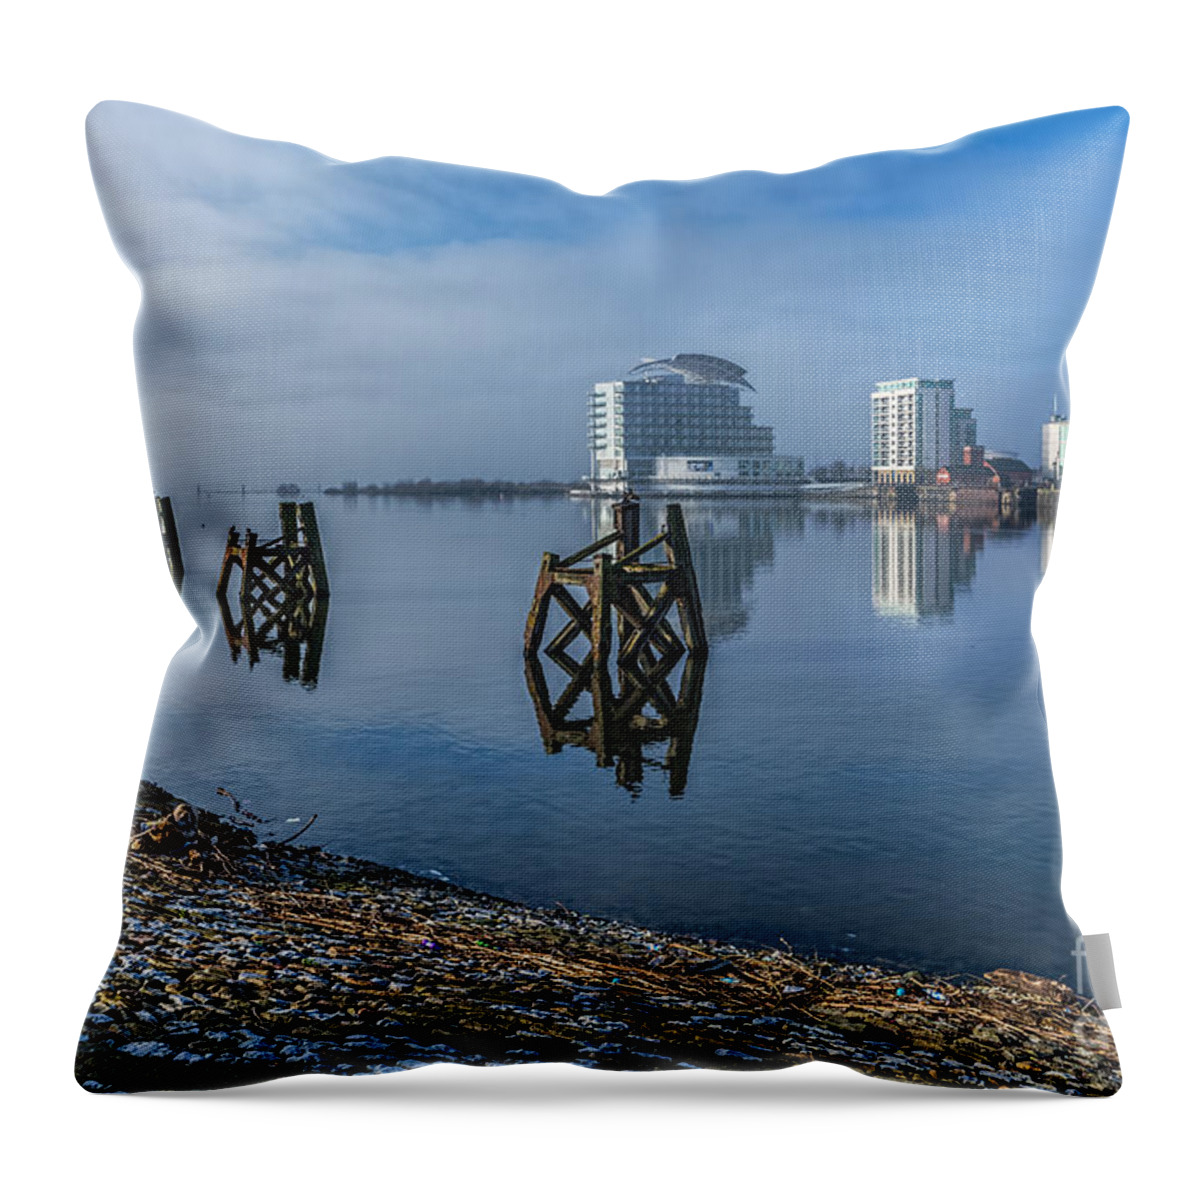 Cardiff Bay Throw Pillow featuring the photograph Fog In The Bay 1 by Steve Purnell